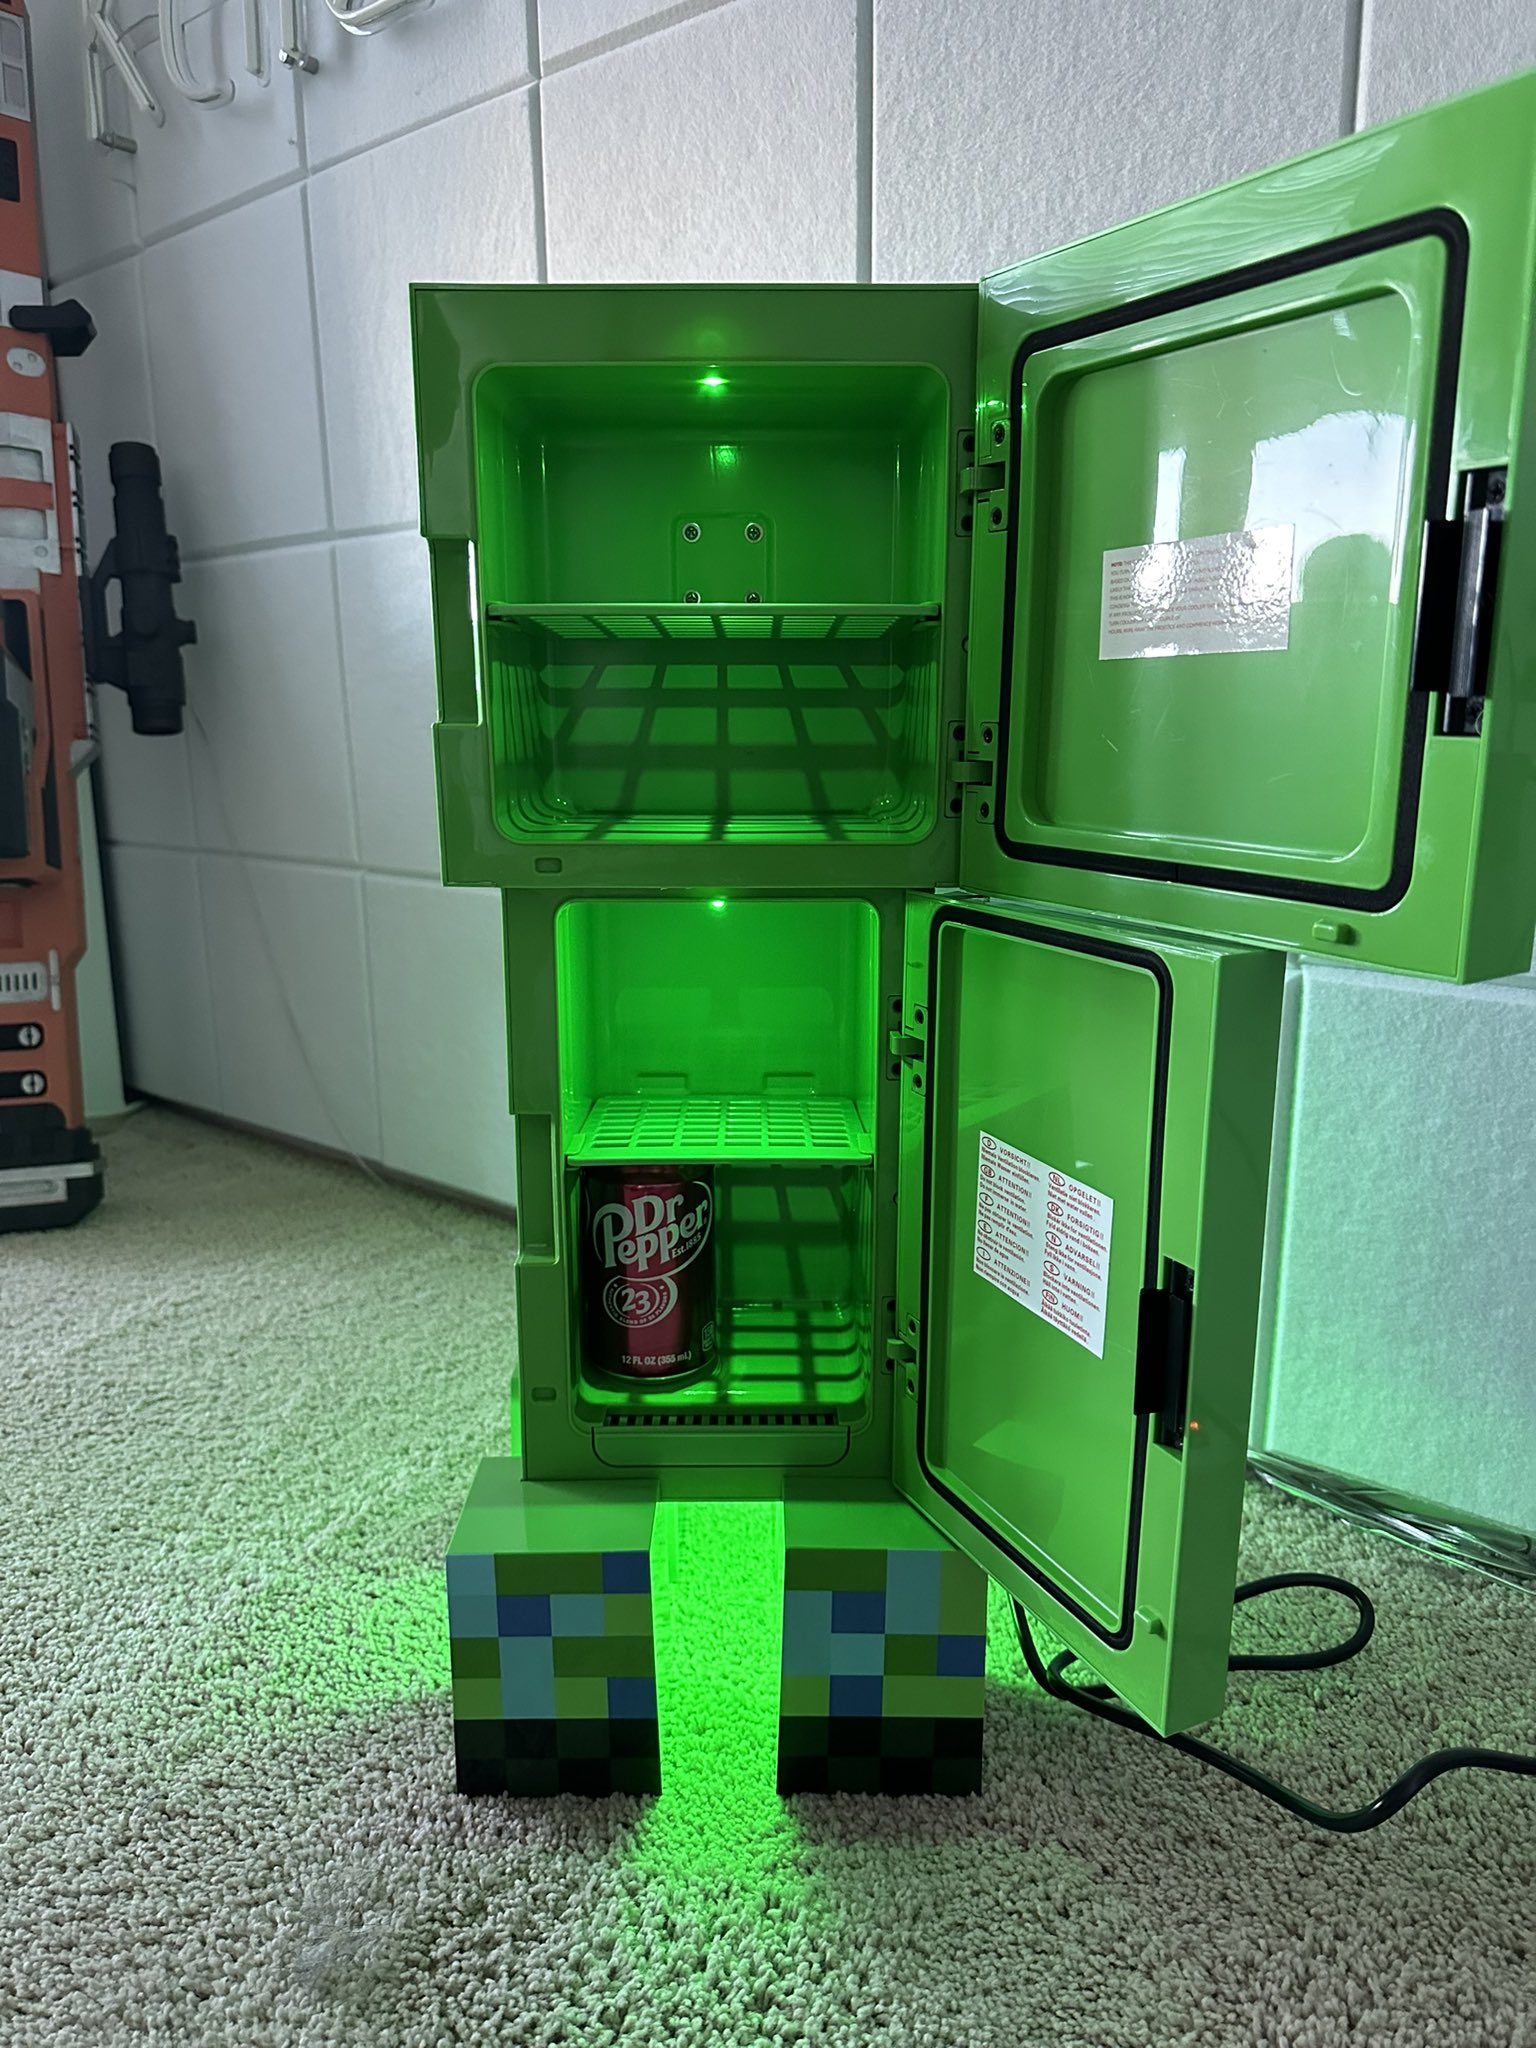 FaZe Kalei on X: LOOK AT MY CREEPER MINI FRIDGE. the perfect size for my  dr pepper 💅🏻  / X